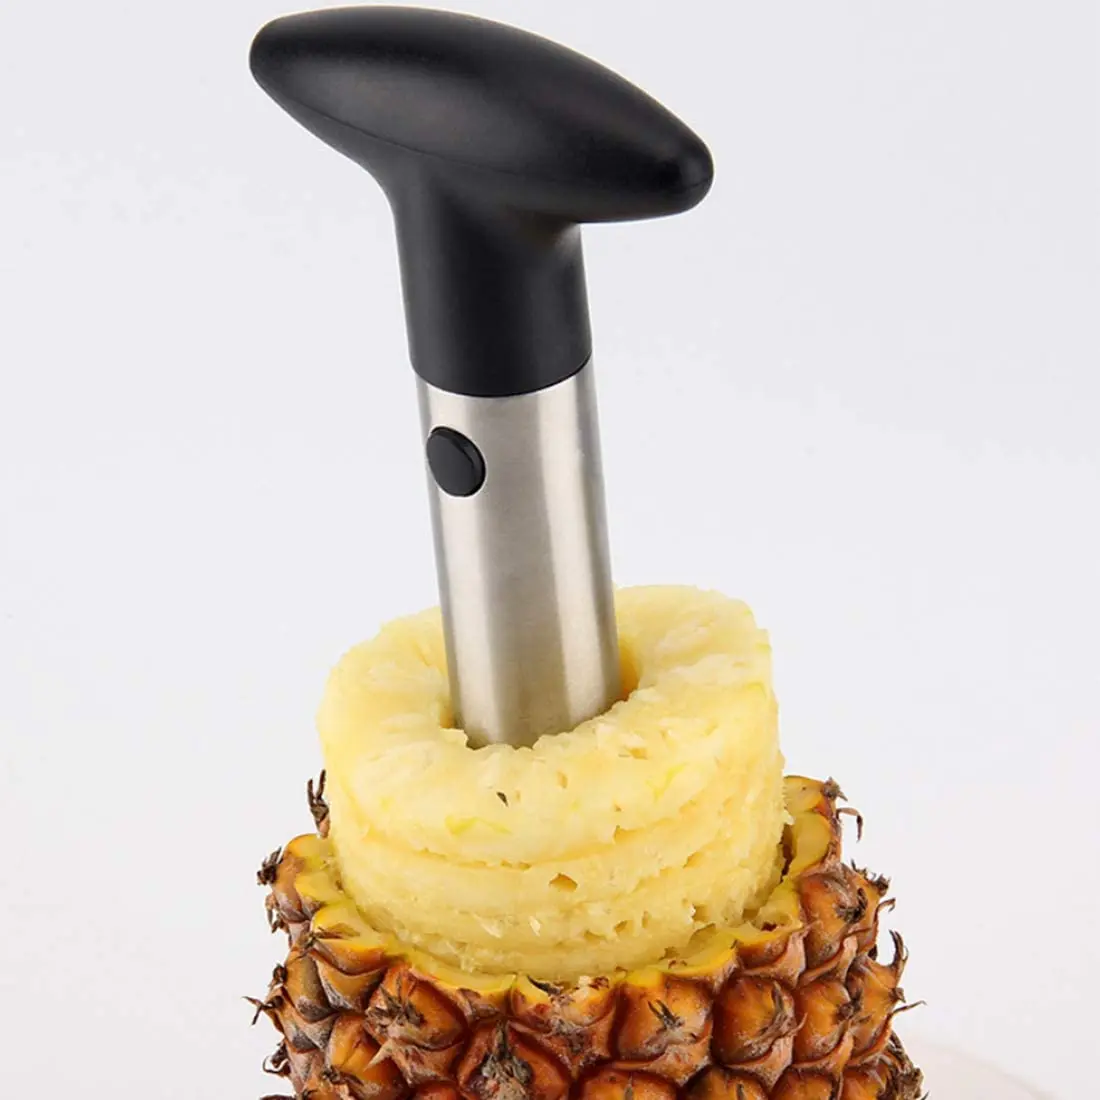 Simplelife Professional Stainless Steel Pineapple Corer Cutter Slicer Peeler-Easy Kitchen Tool